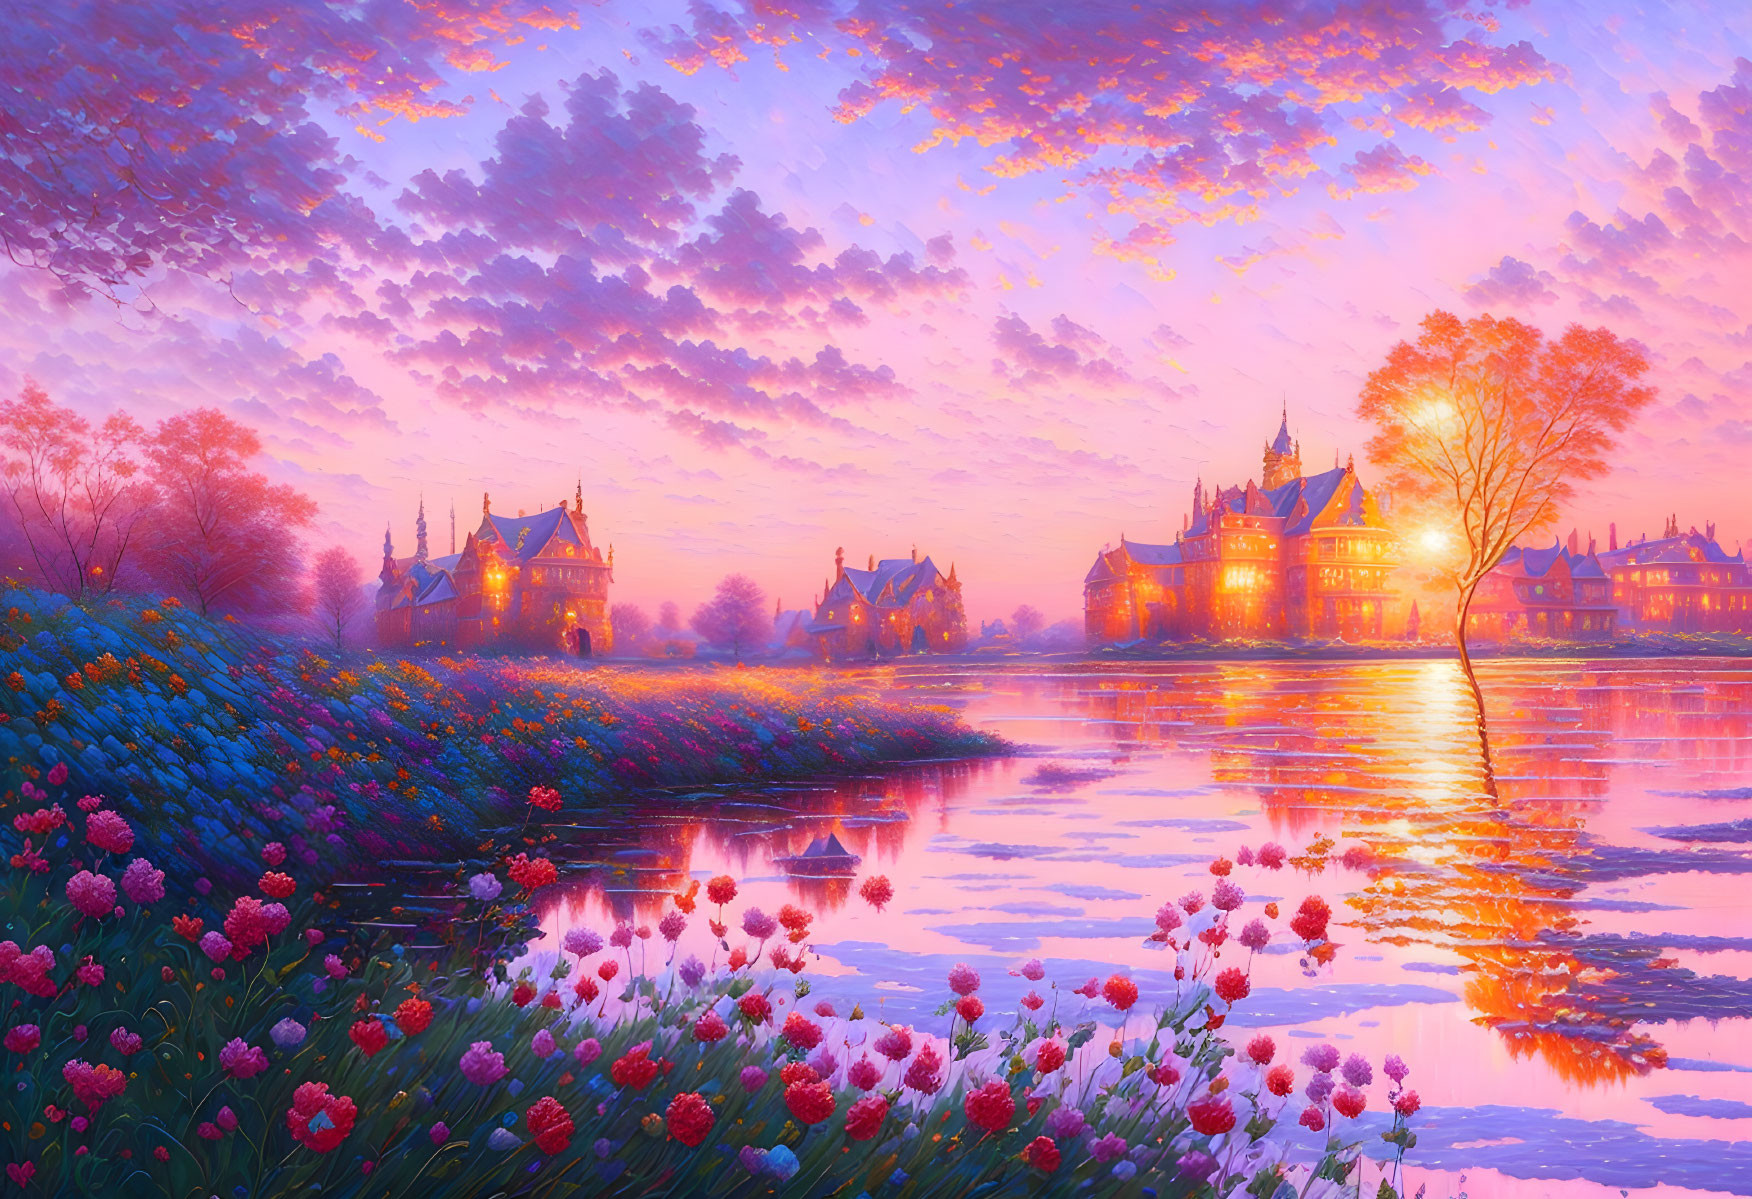 Vibrant purple sunset over tranquil lake with flowers and distant castles